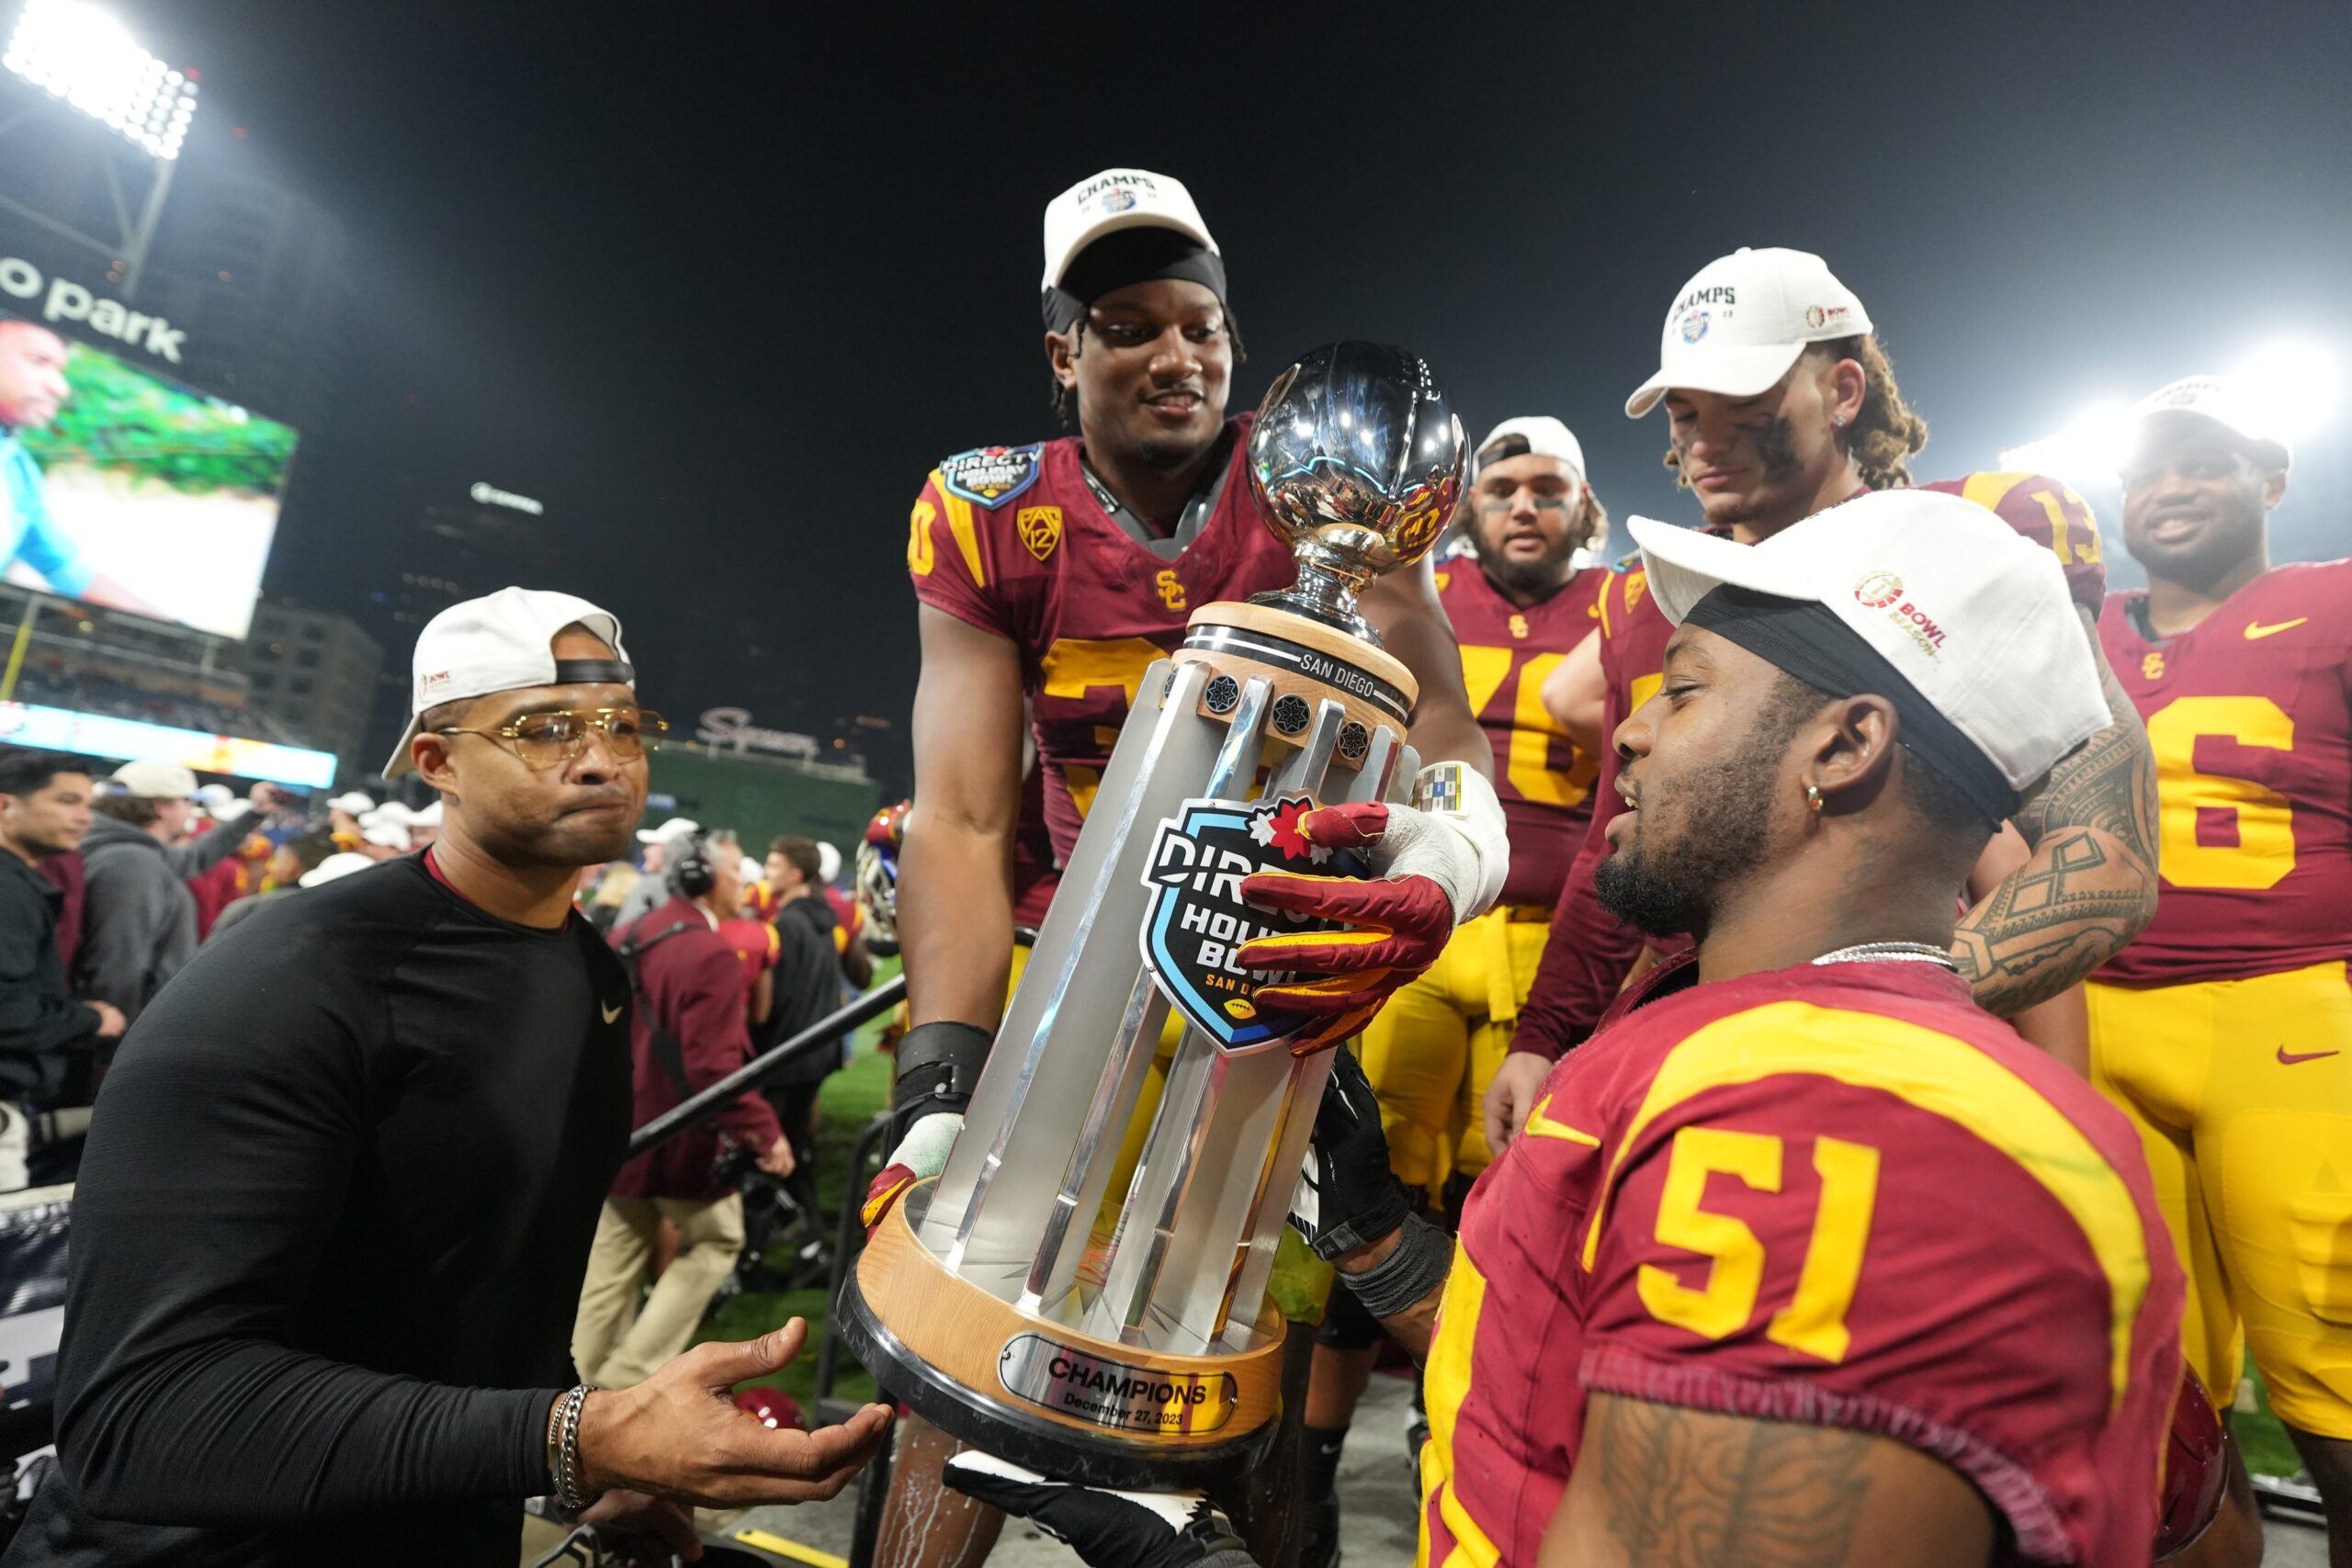 USC defeated Louisville 42-28 in the Holiday Bowl. Read about the Trojans' quarterback Miller Moss' record-breaking performance.